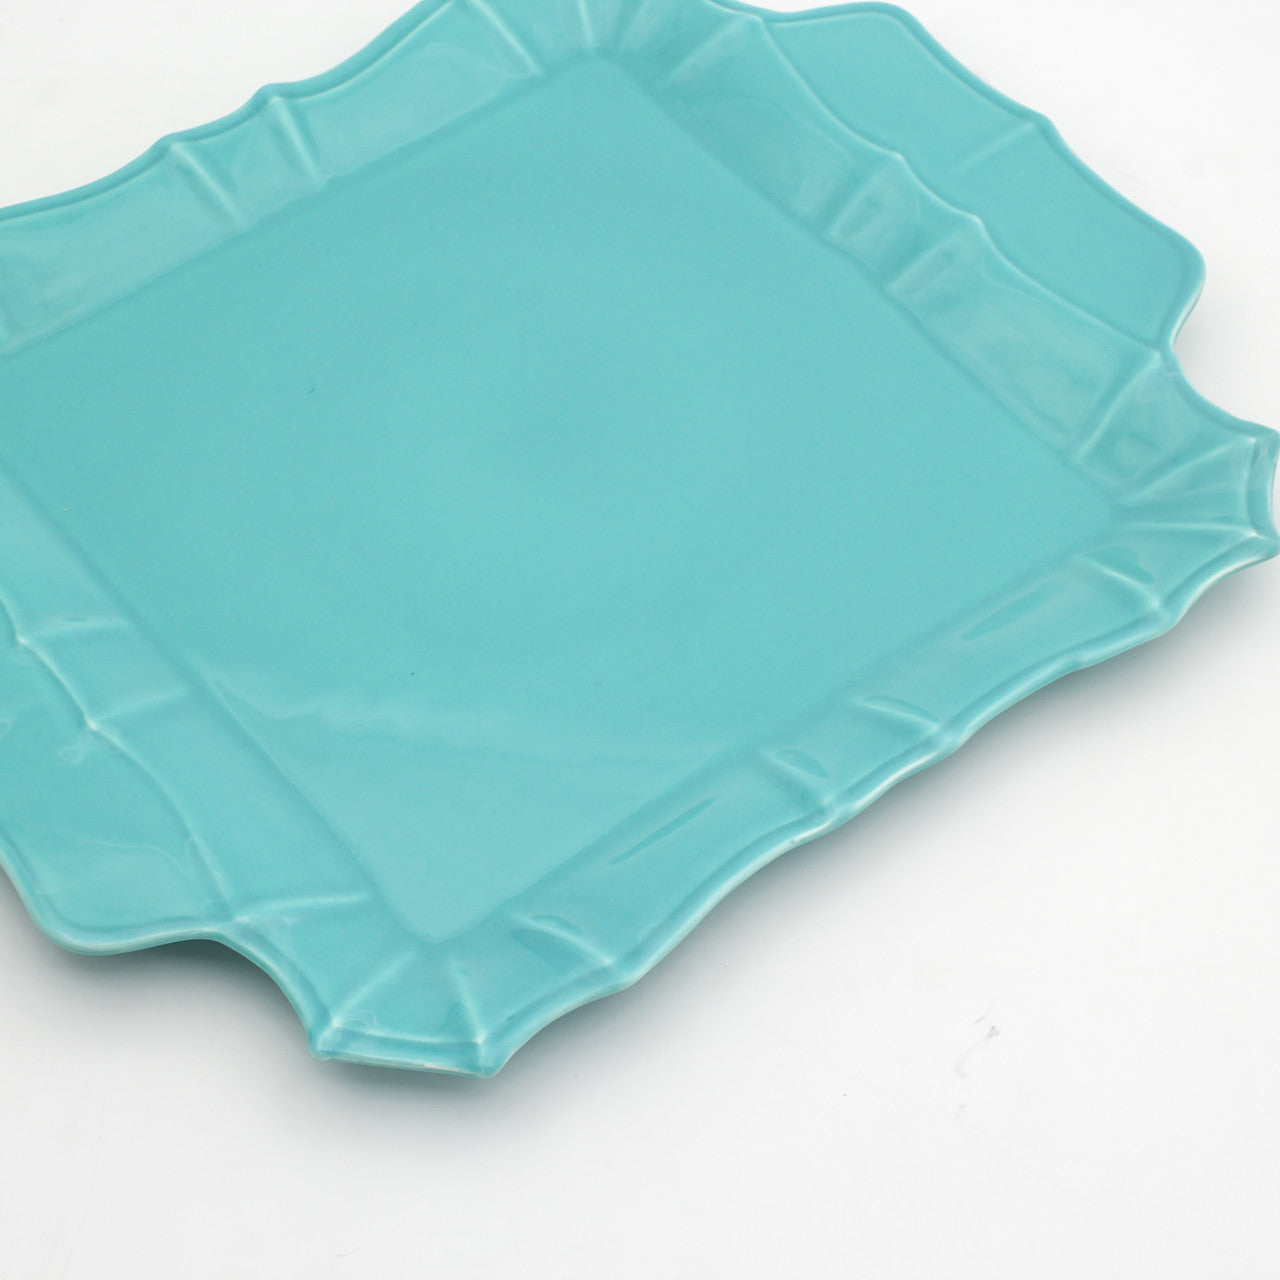 Chloe Square Platter with Handles in Turquoise